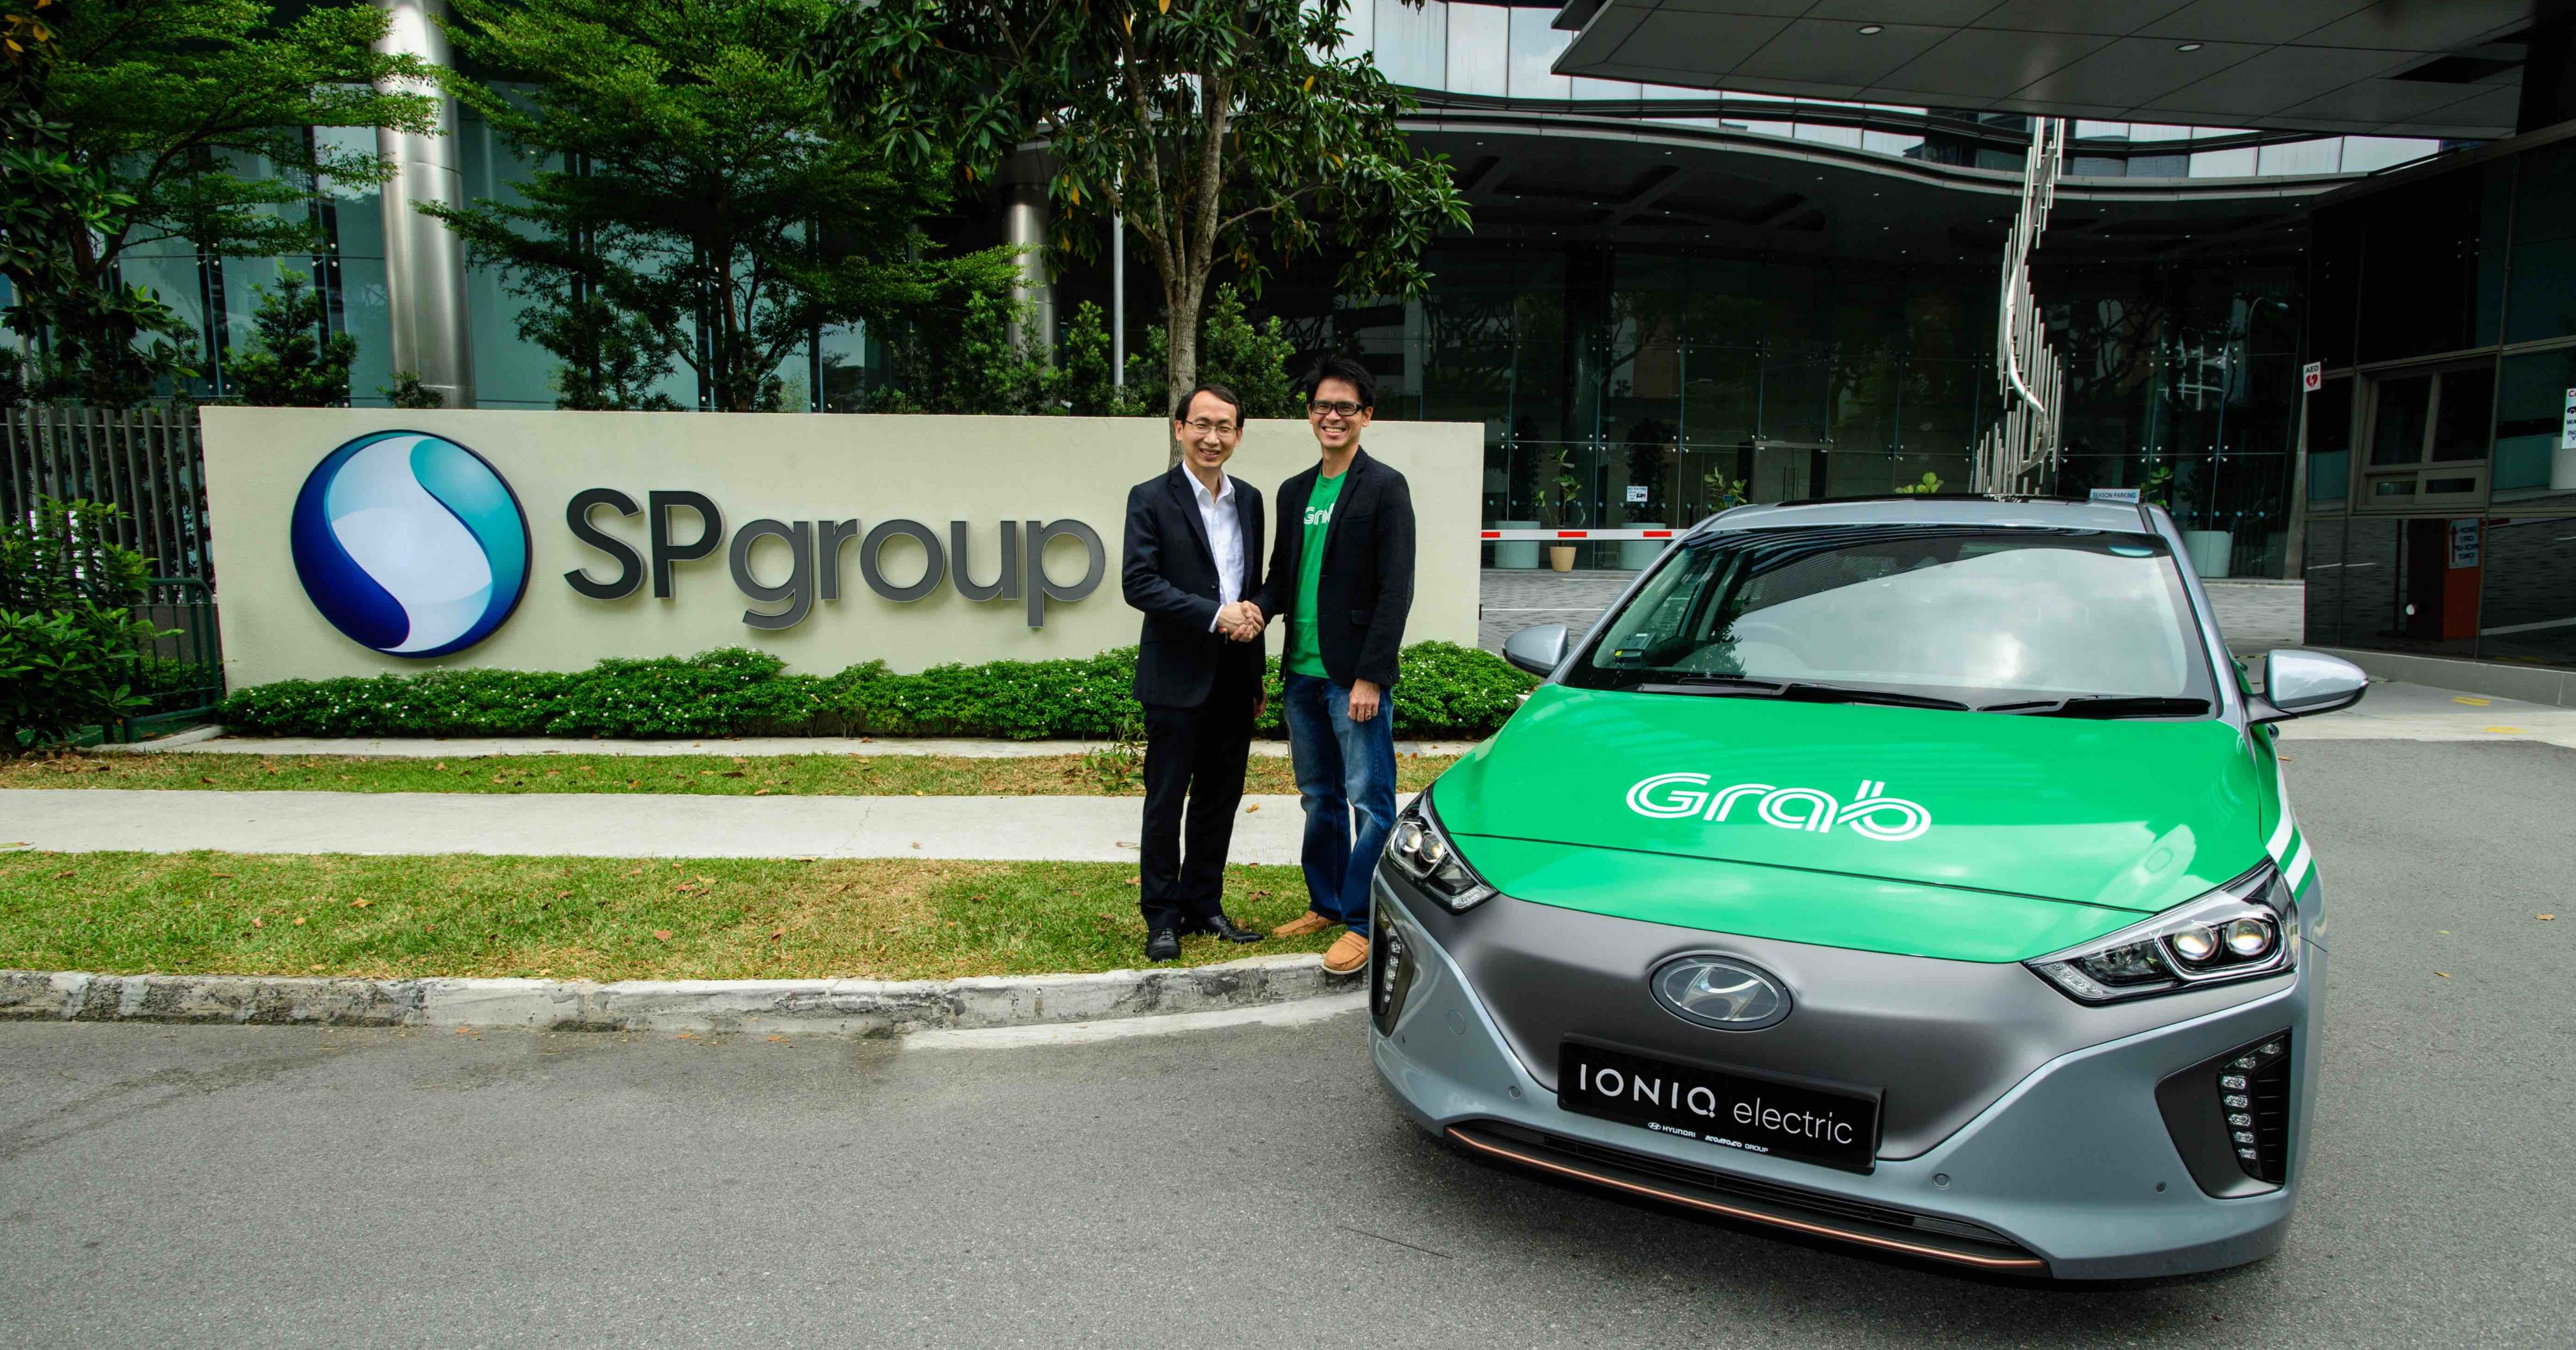 Grab Invests in New Electric Vehicle Fleet, Enabled by SP Group’s Fast